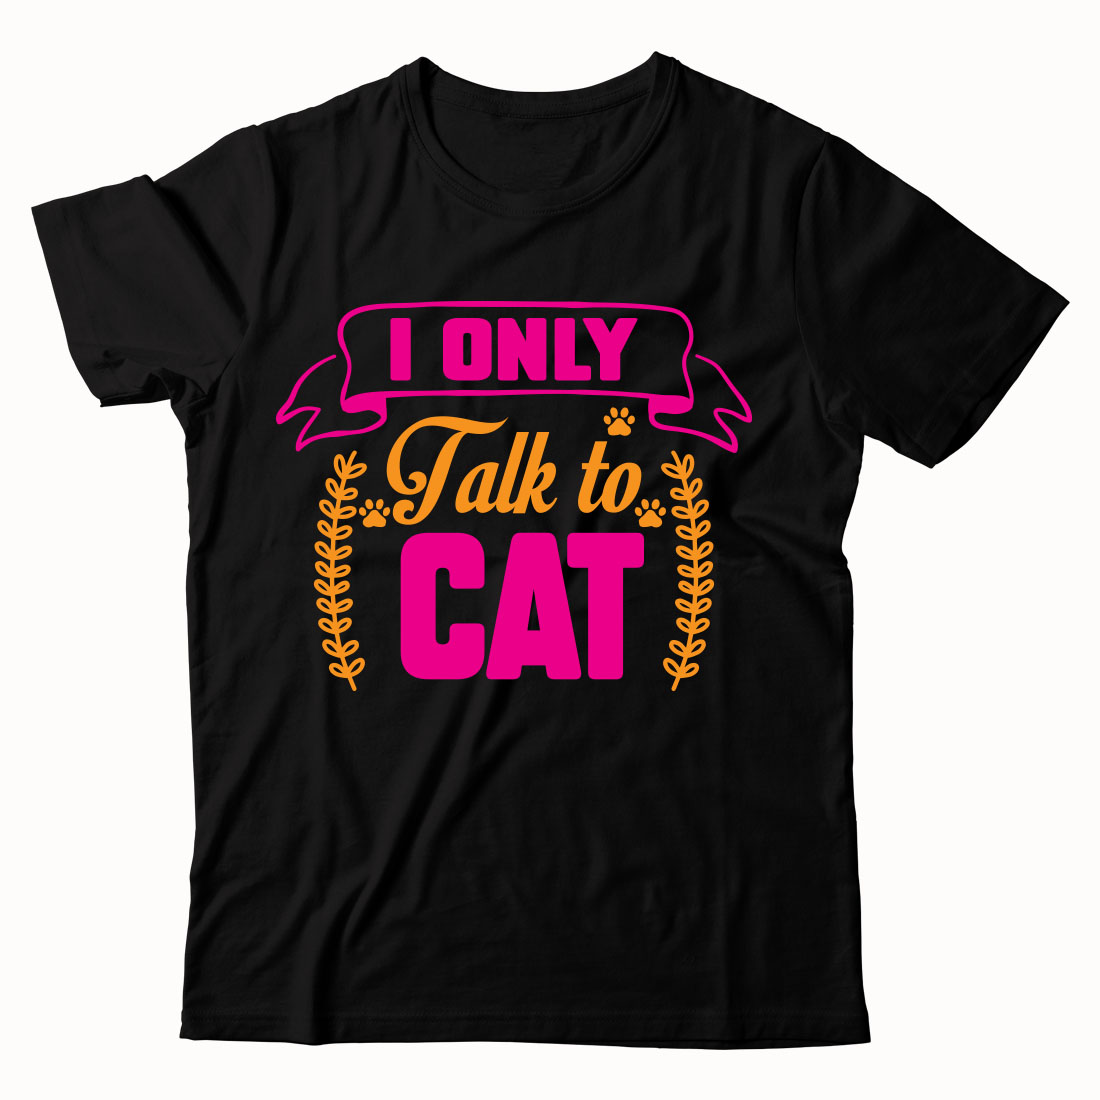 Black t - shirt with the words i only talk to cat on it.